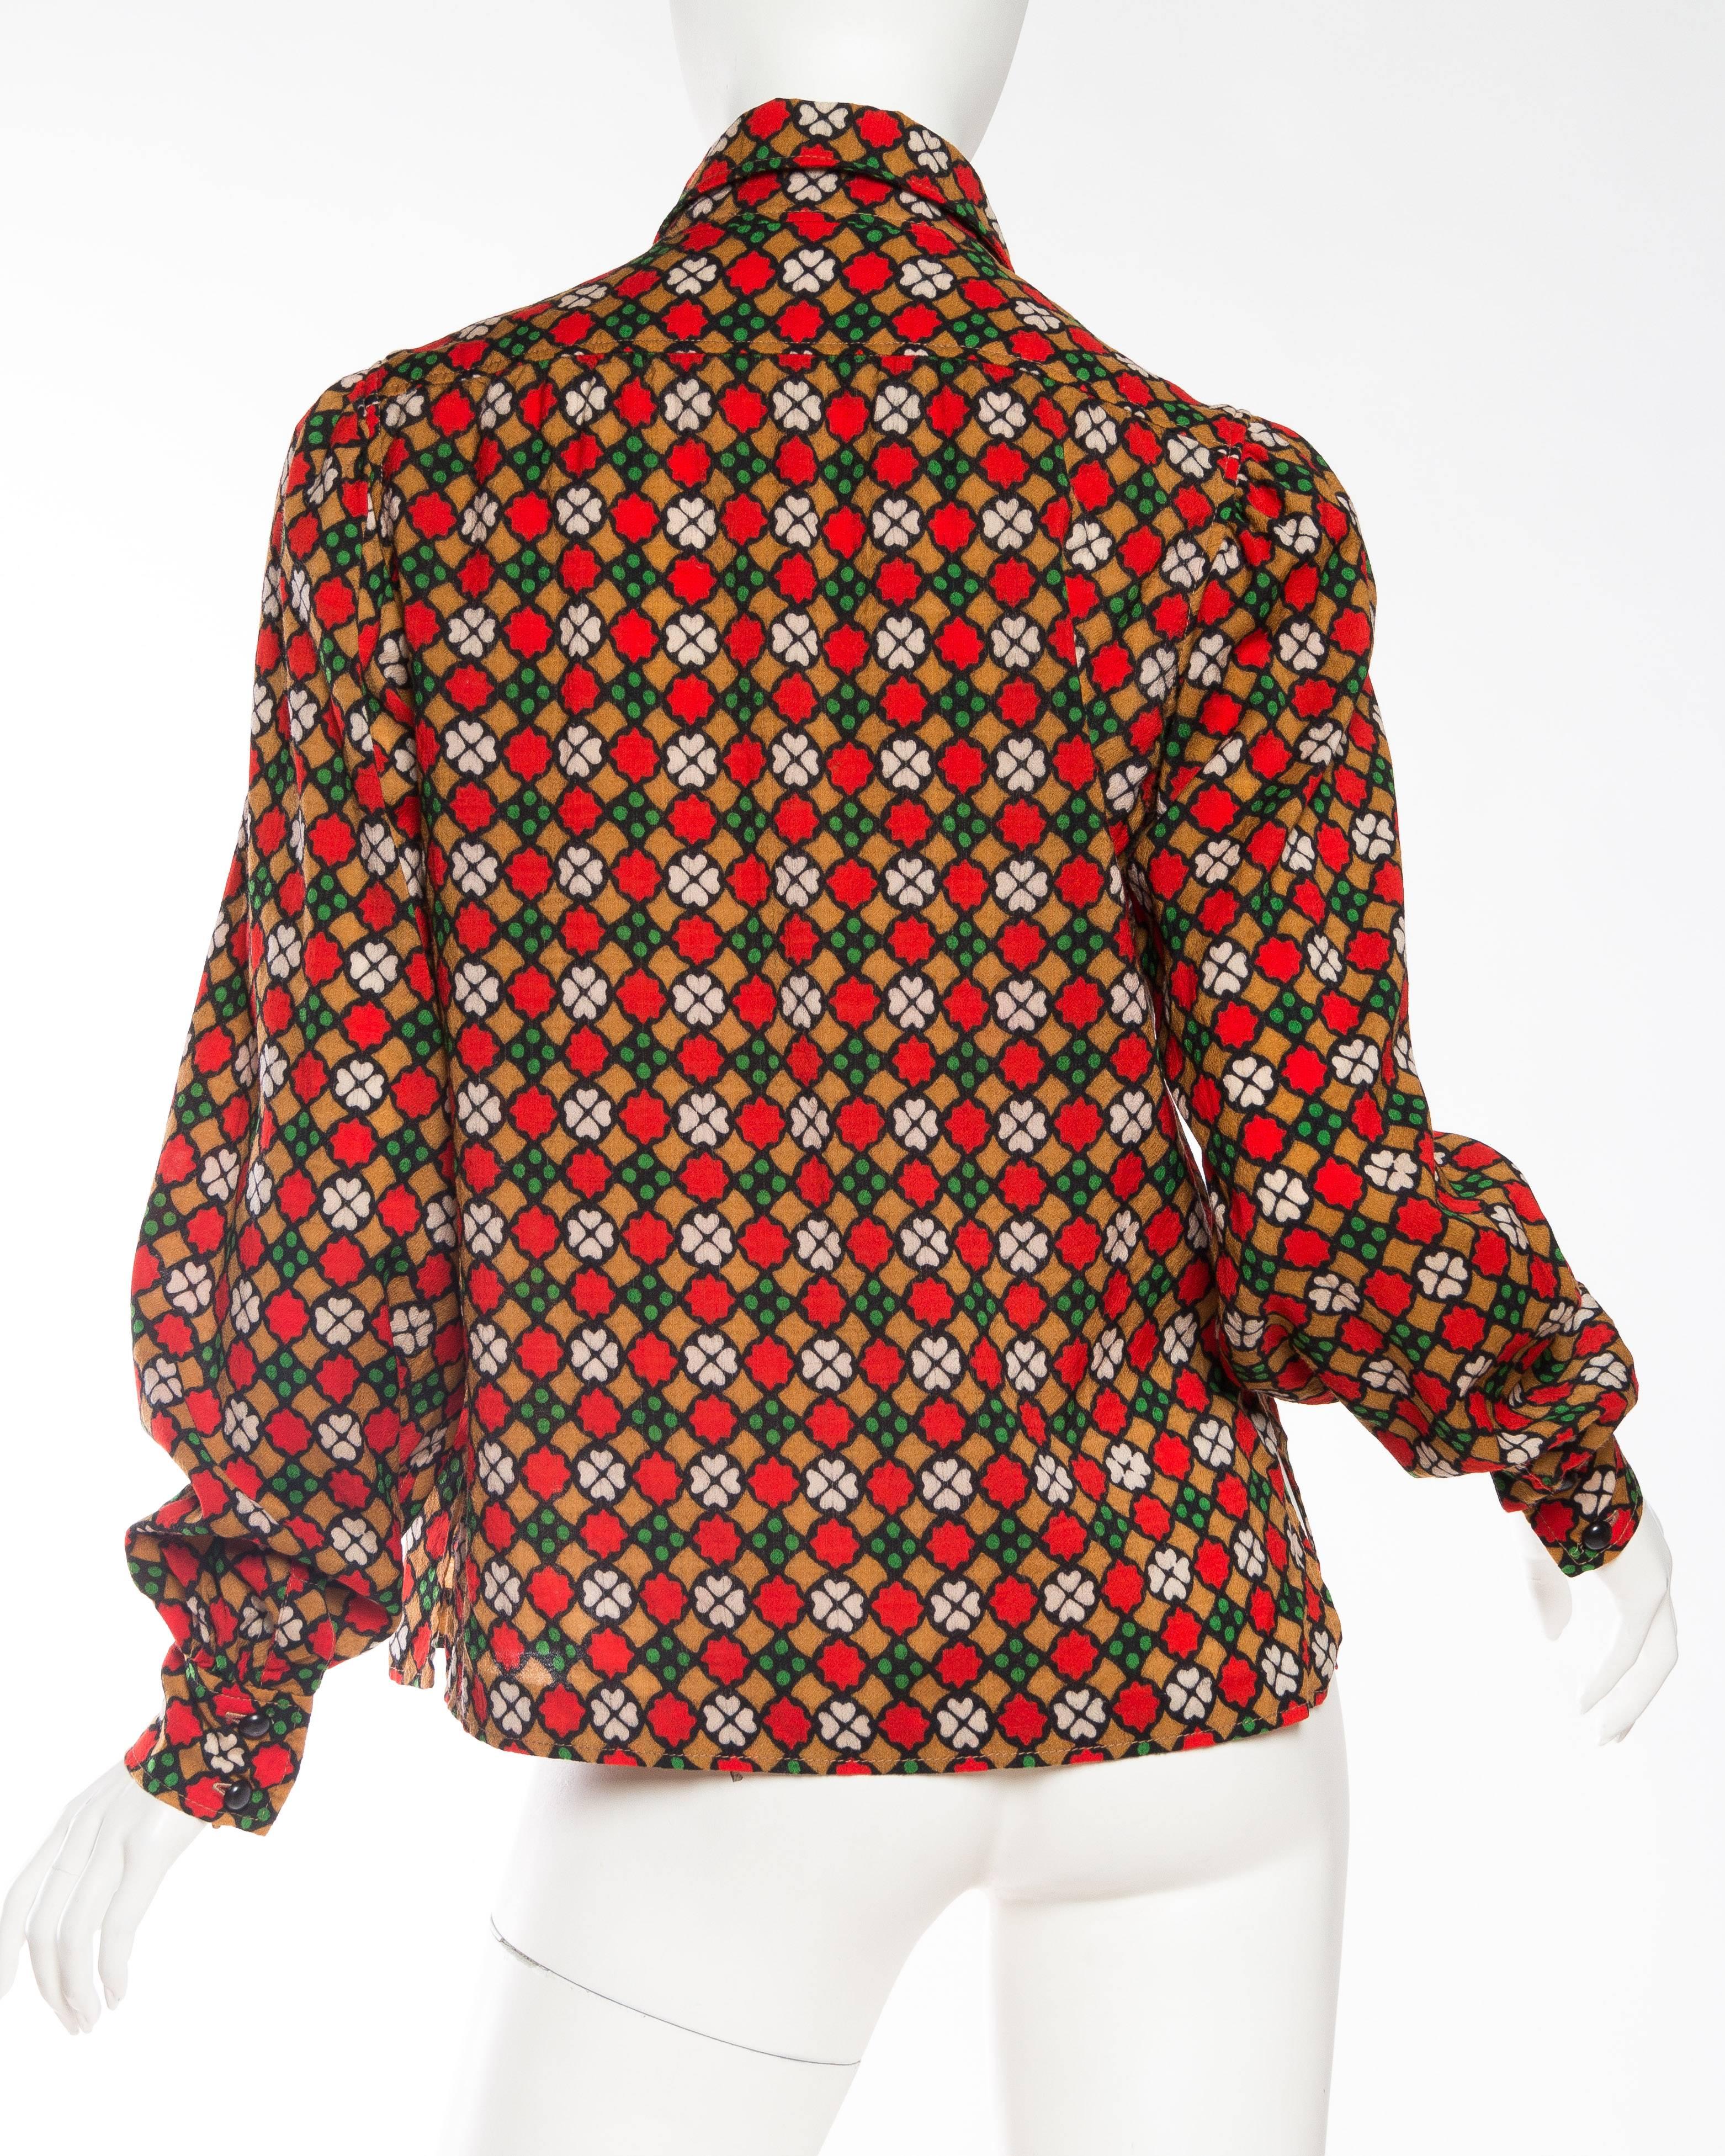 Iconic Documented Yves Saint Laurent Printed Blouse 1